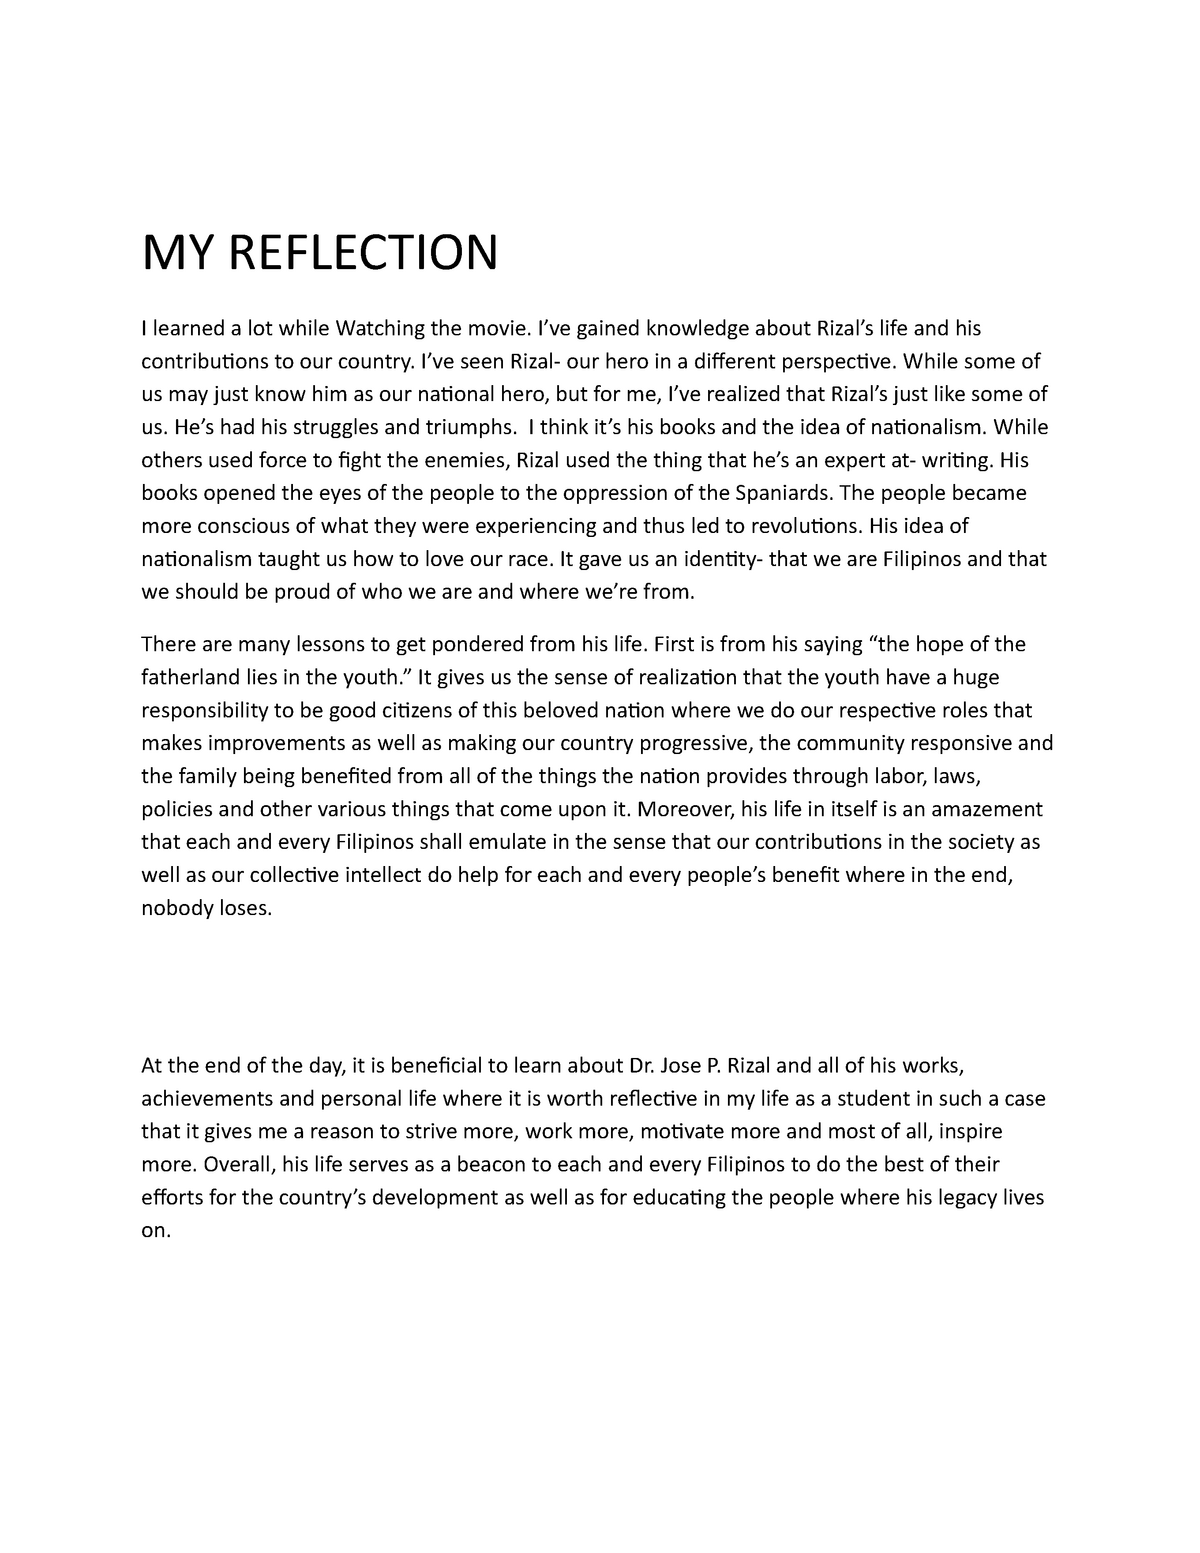 reflection essay for objective 13